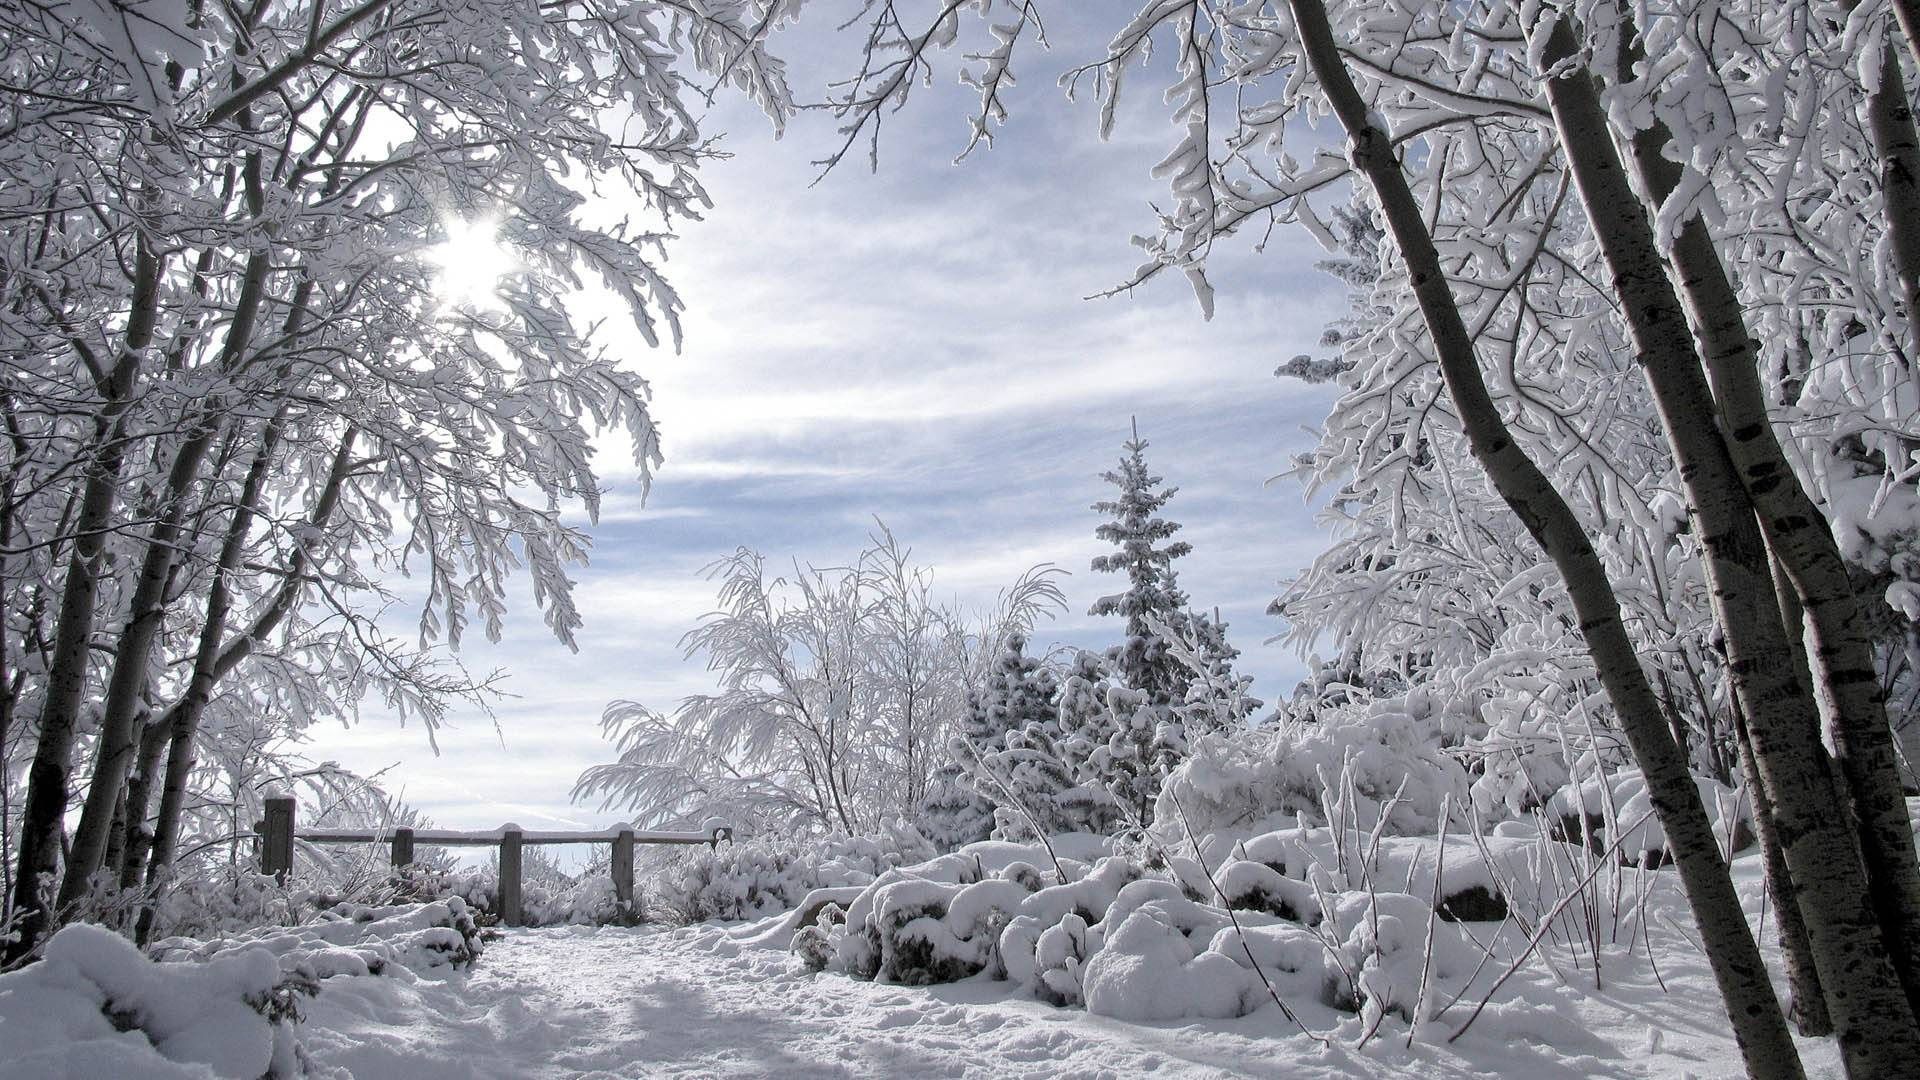 Download Wallpaper 1920x1080 Snow, Trees, Winter, Fence ...